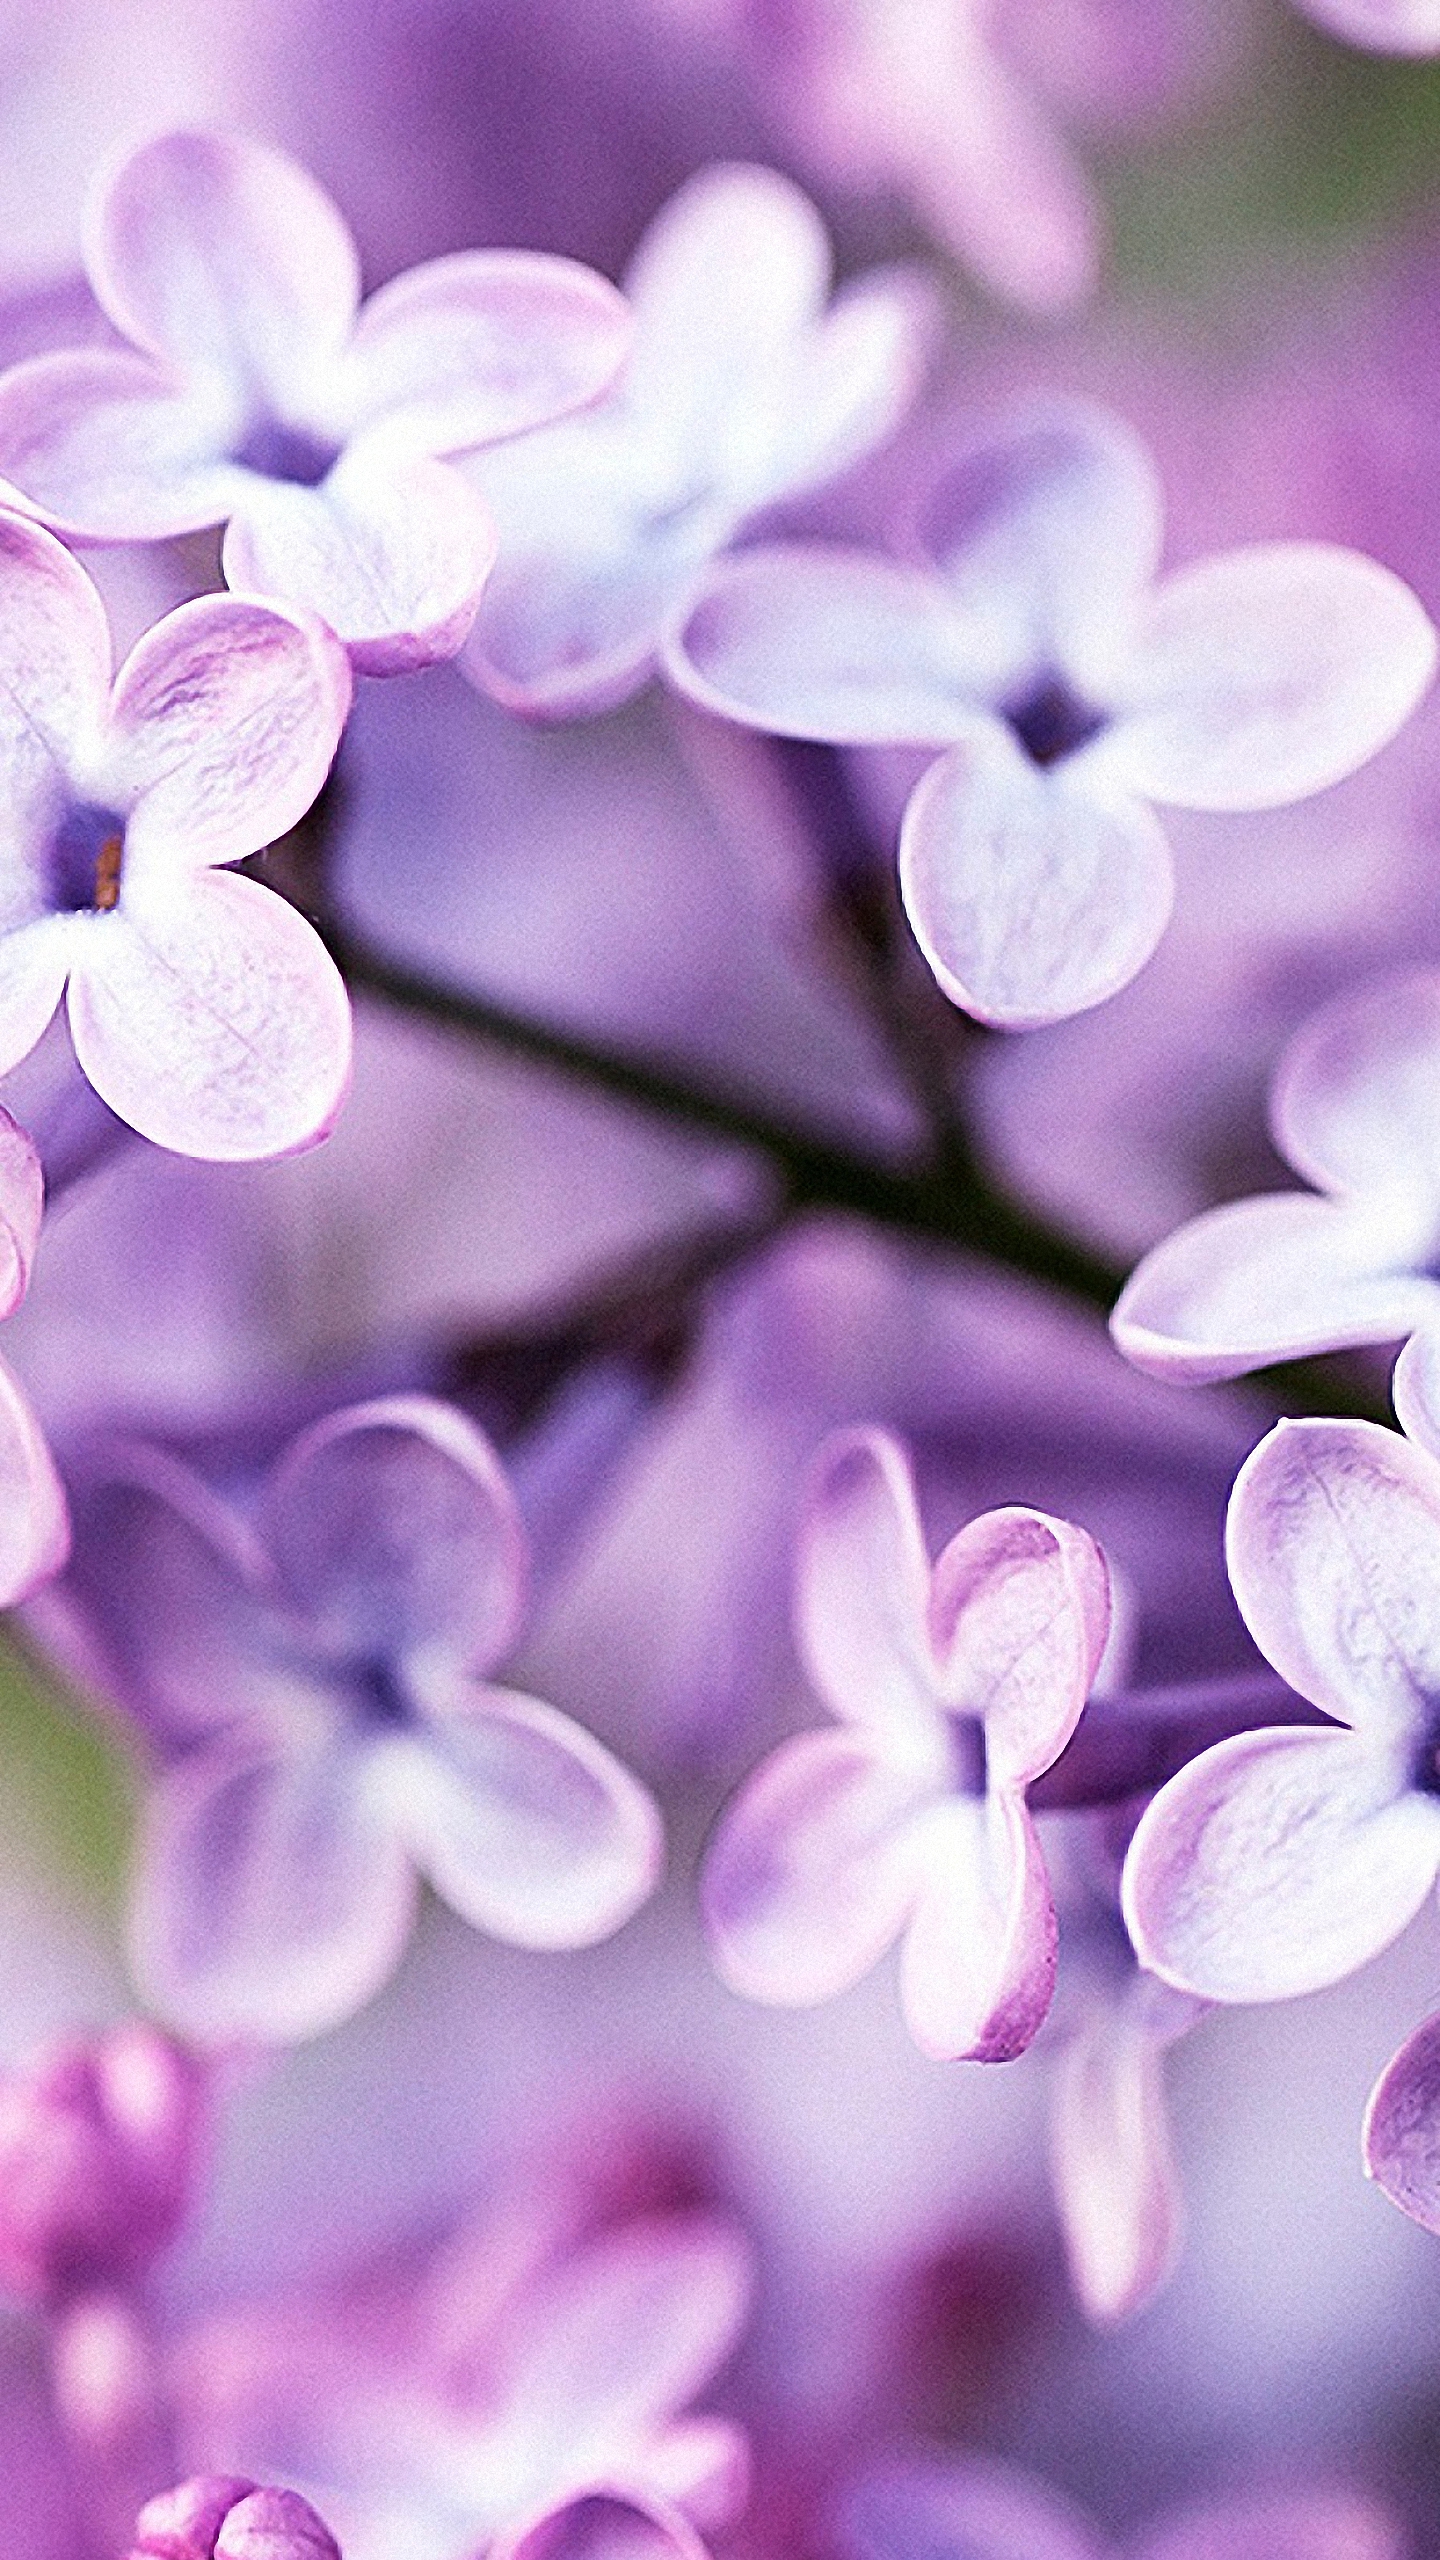 Spring Wallpaper For Iphone 6s - HD Wallpaper 